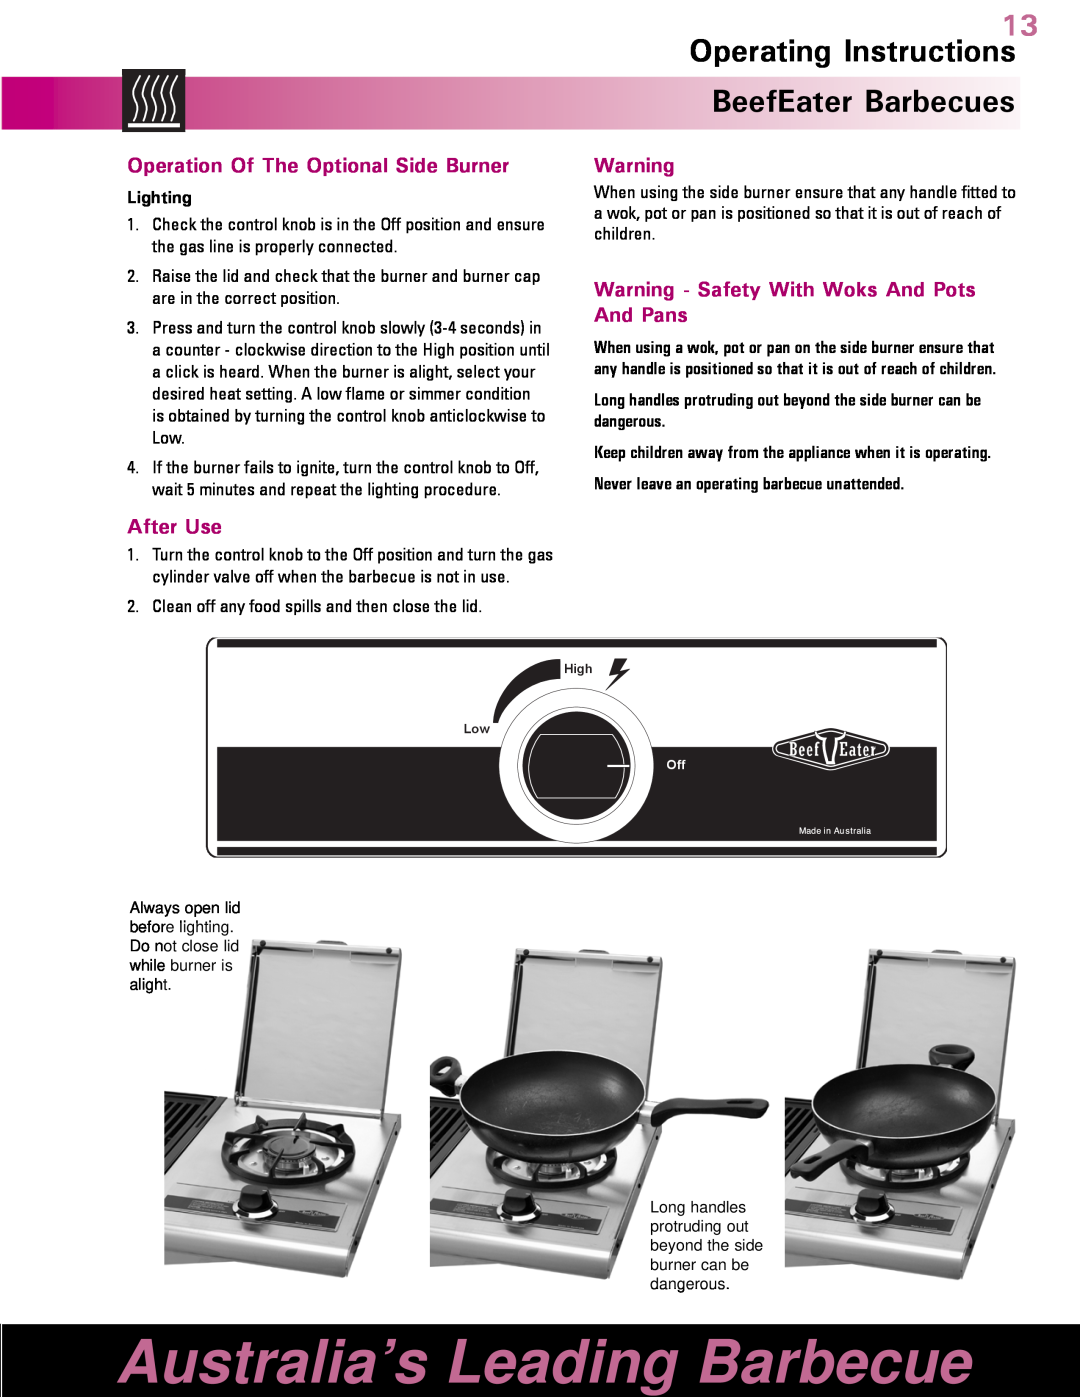 BeefEater Barbecue manual Operation Of The Optional Side Burner, Warning - Safety With Woks And Pots And Pans, Lighting 